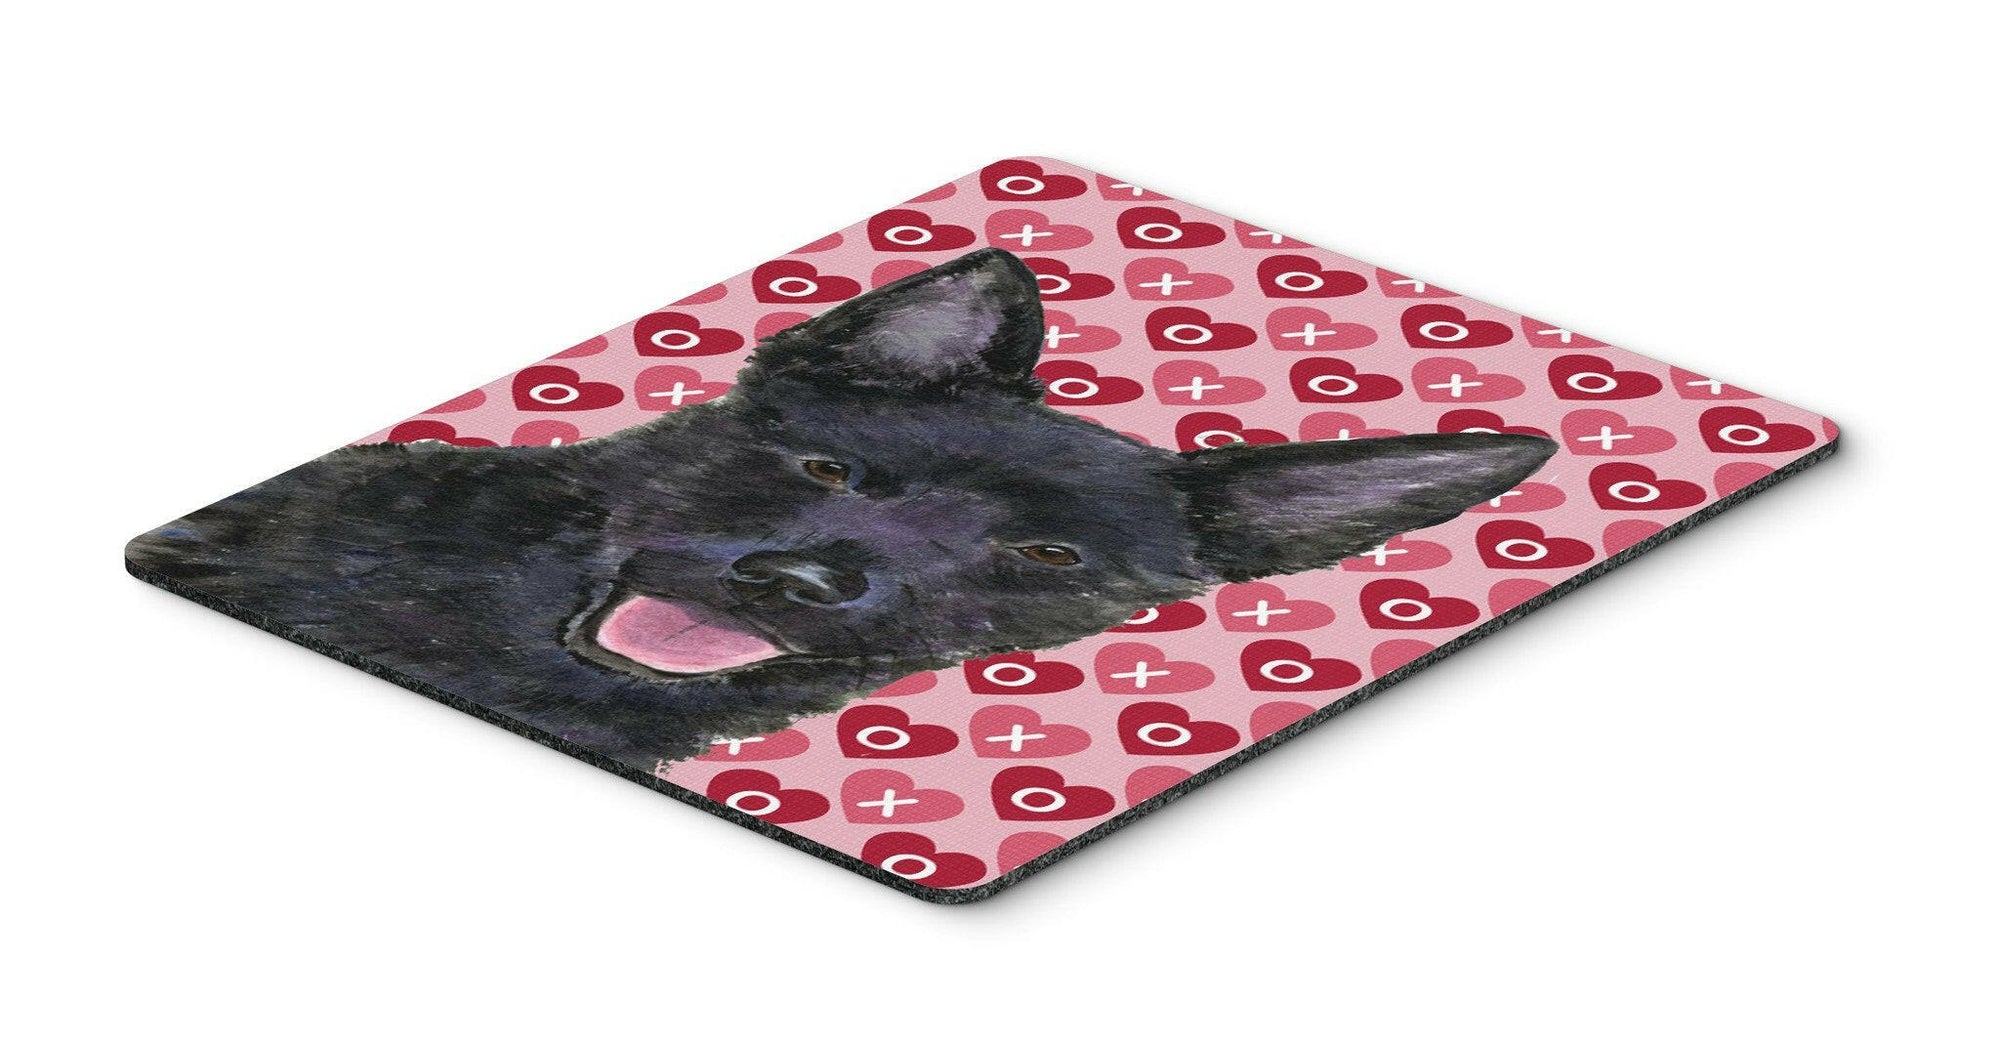 Australian Kelpie Hearts Love and Valentine's Day Mouse Pad, Hot Pad or Trivet by Caroline's Treasures